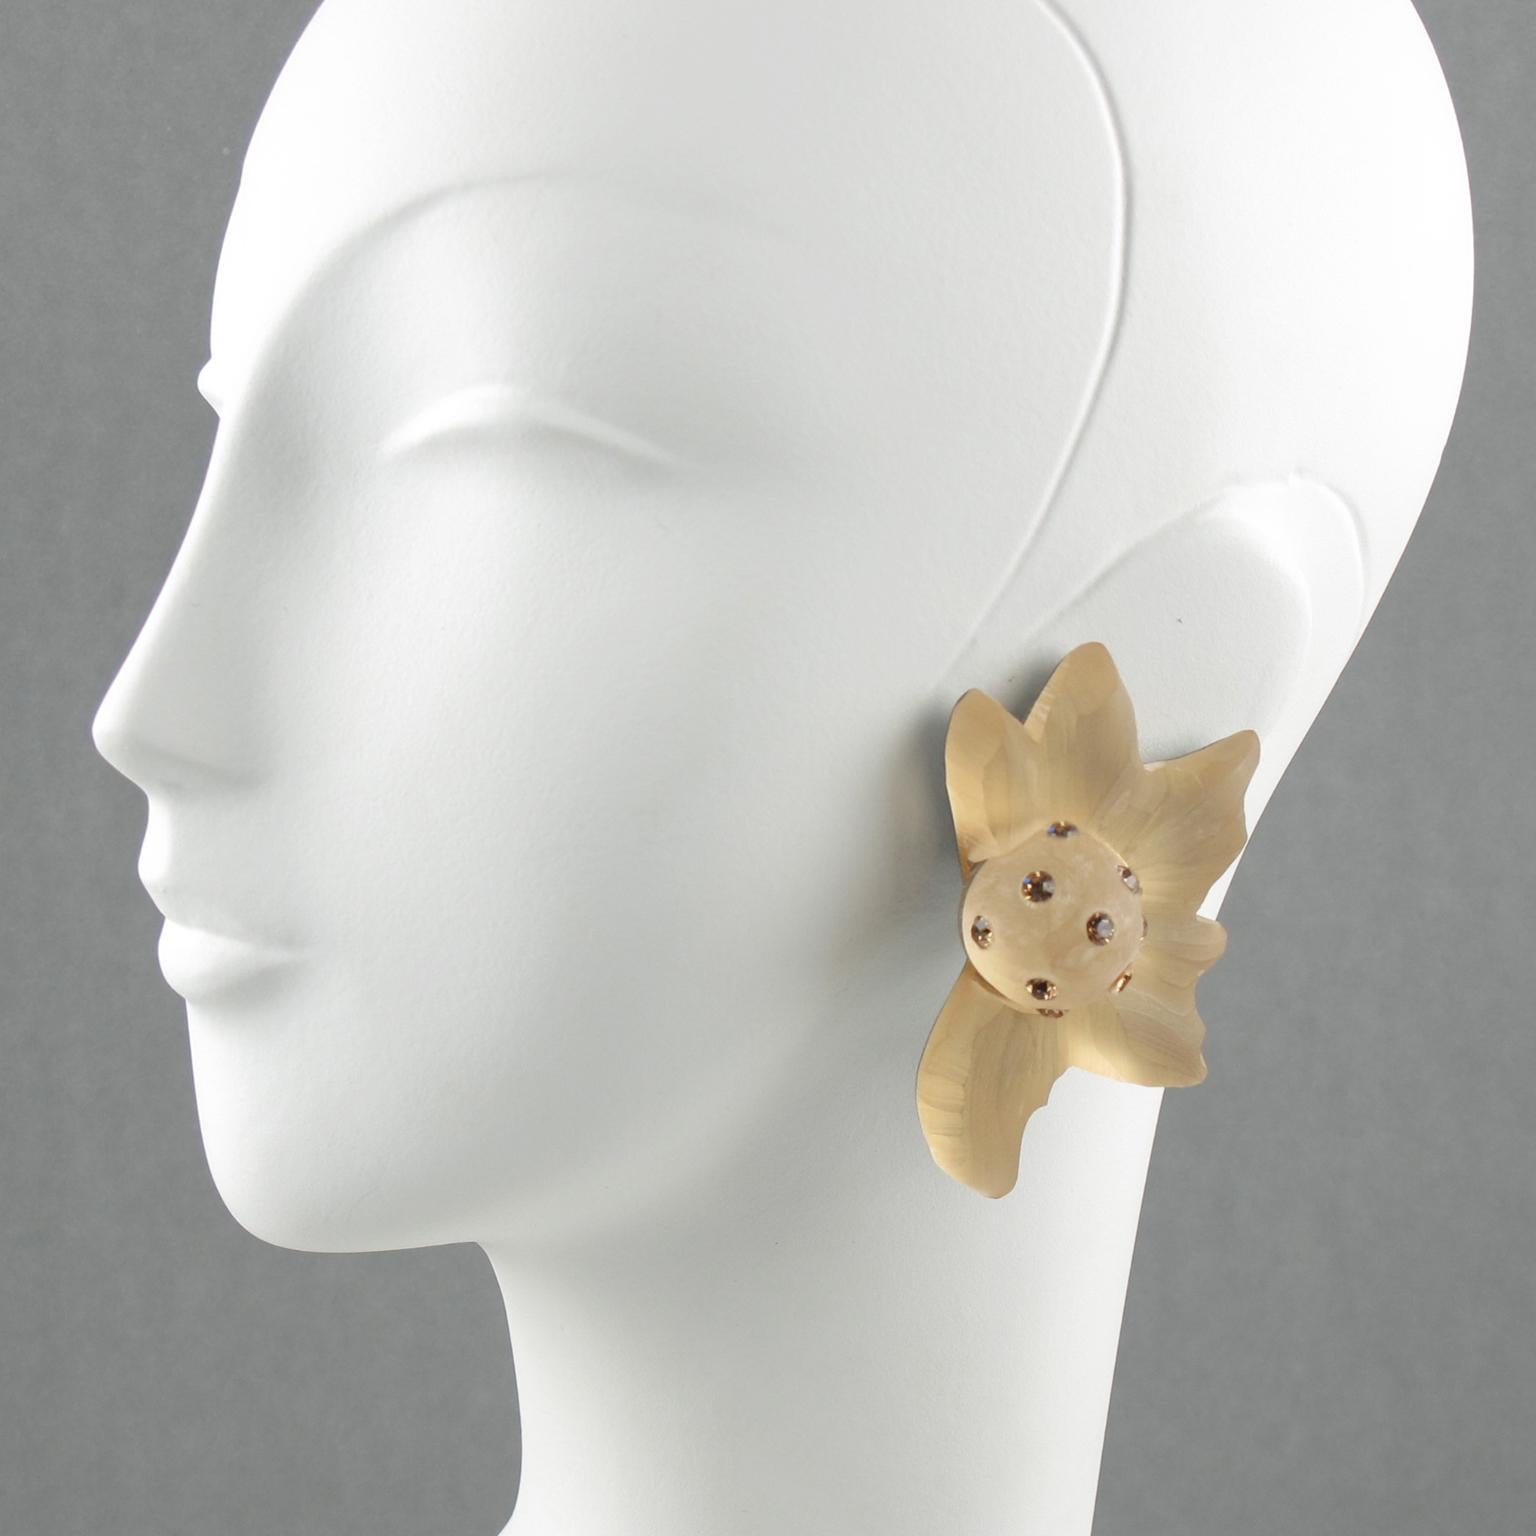 Harriet Bauknight for Kaso designed these stunning floral frosted Lucite clip-on earrings in the 1980s. They feature an oversized dimensional shape, all carved and textured in a beautiful flower in frosted champagne color ornate with light Colorado